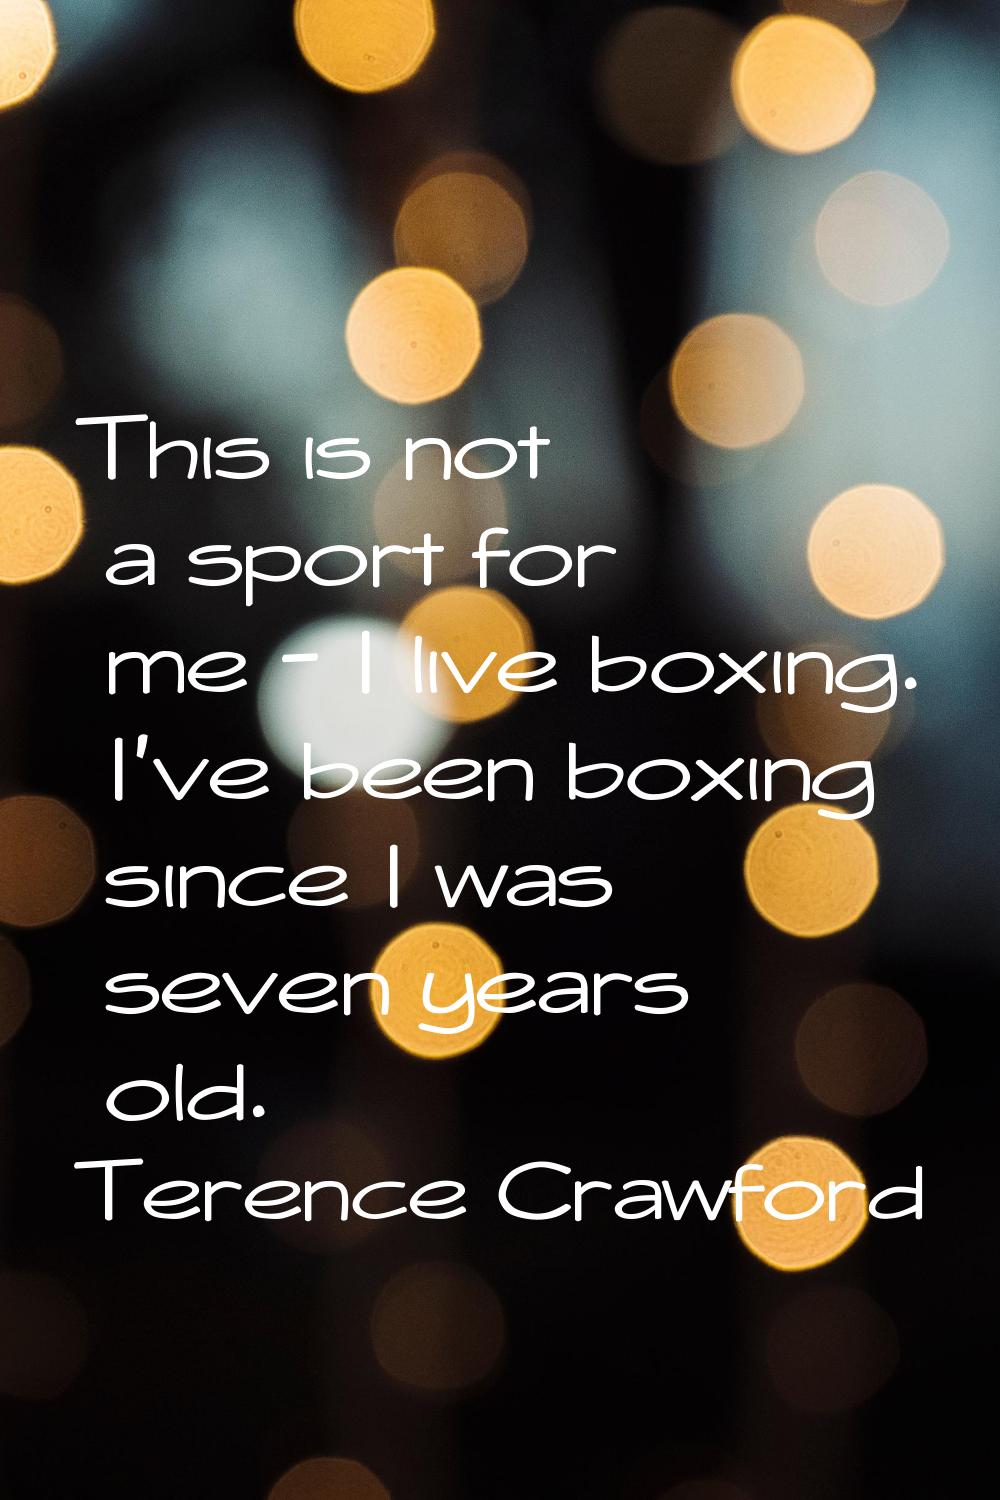 This is not a sport for me - I live boxing. I've been boxing since I was seven years old.